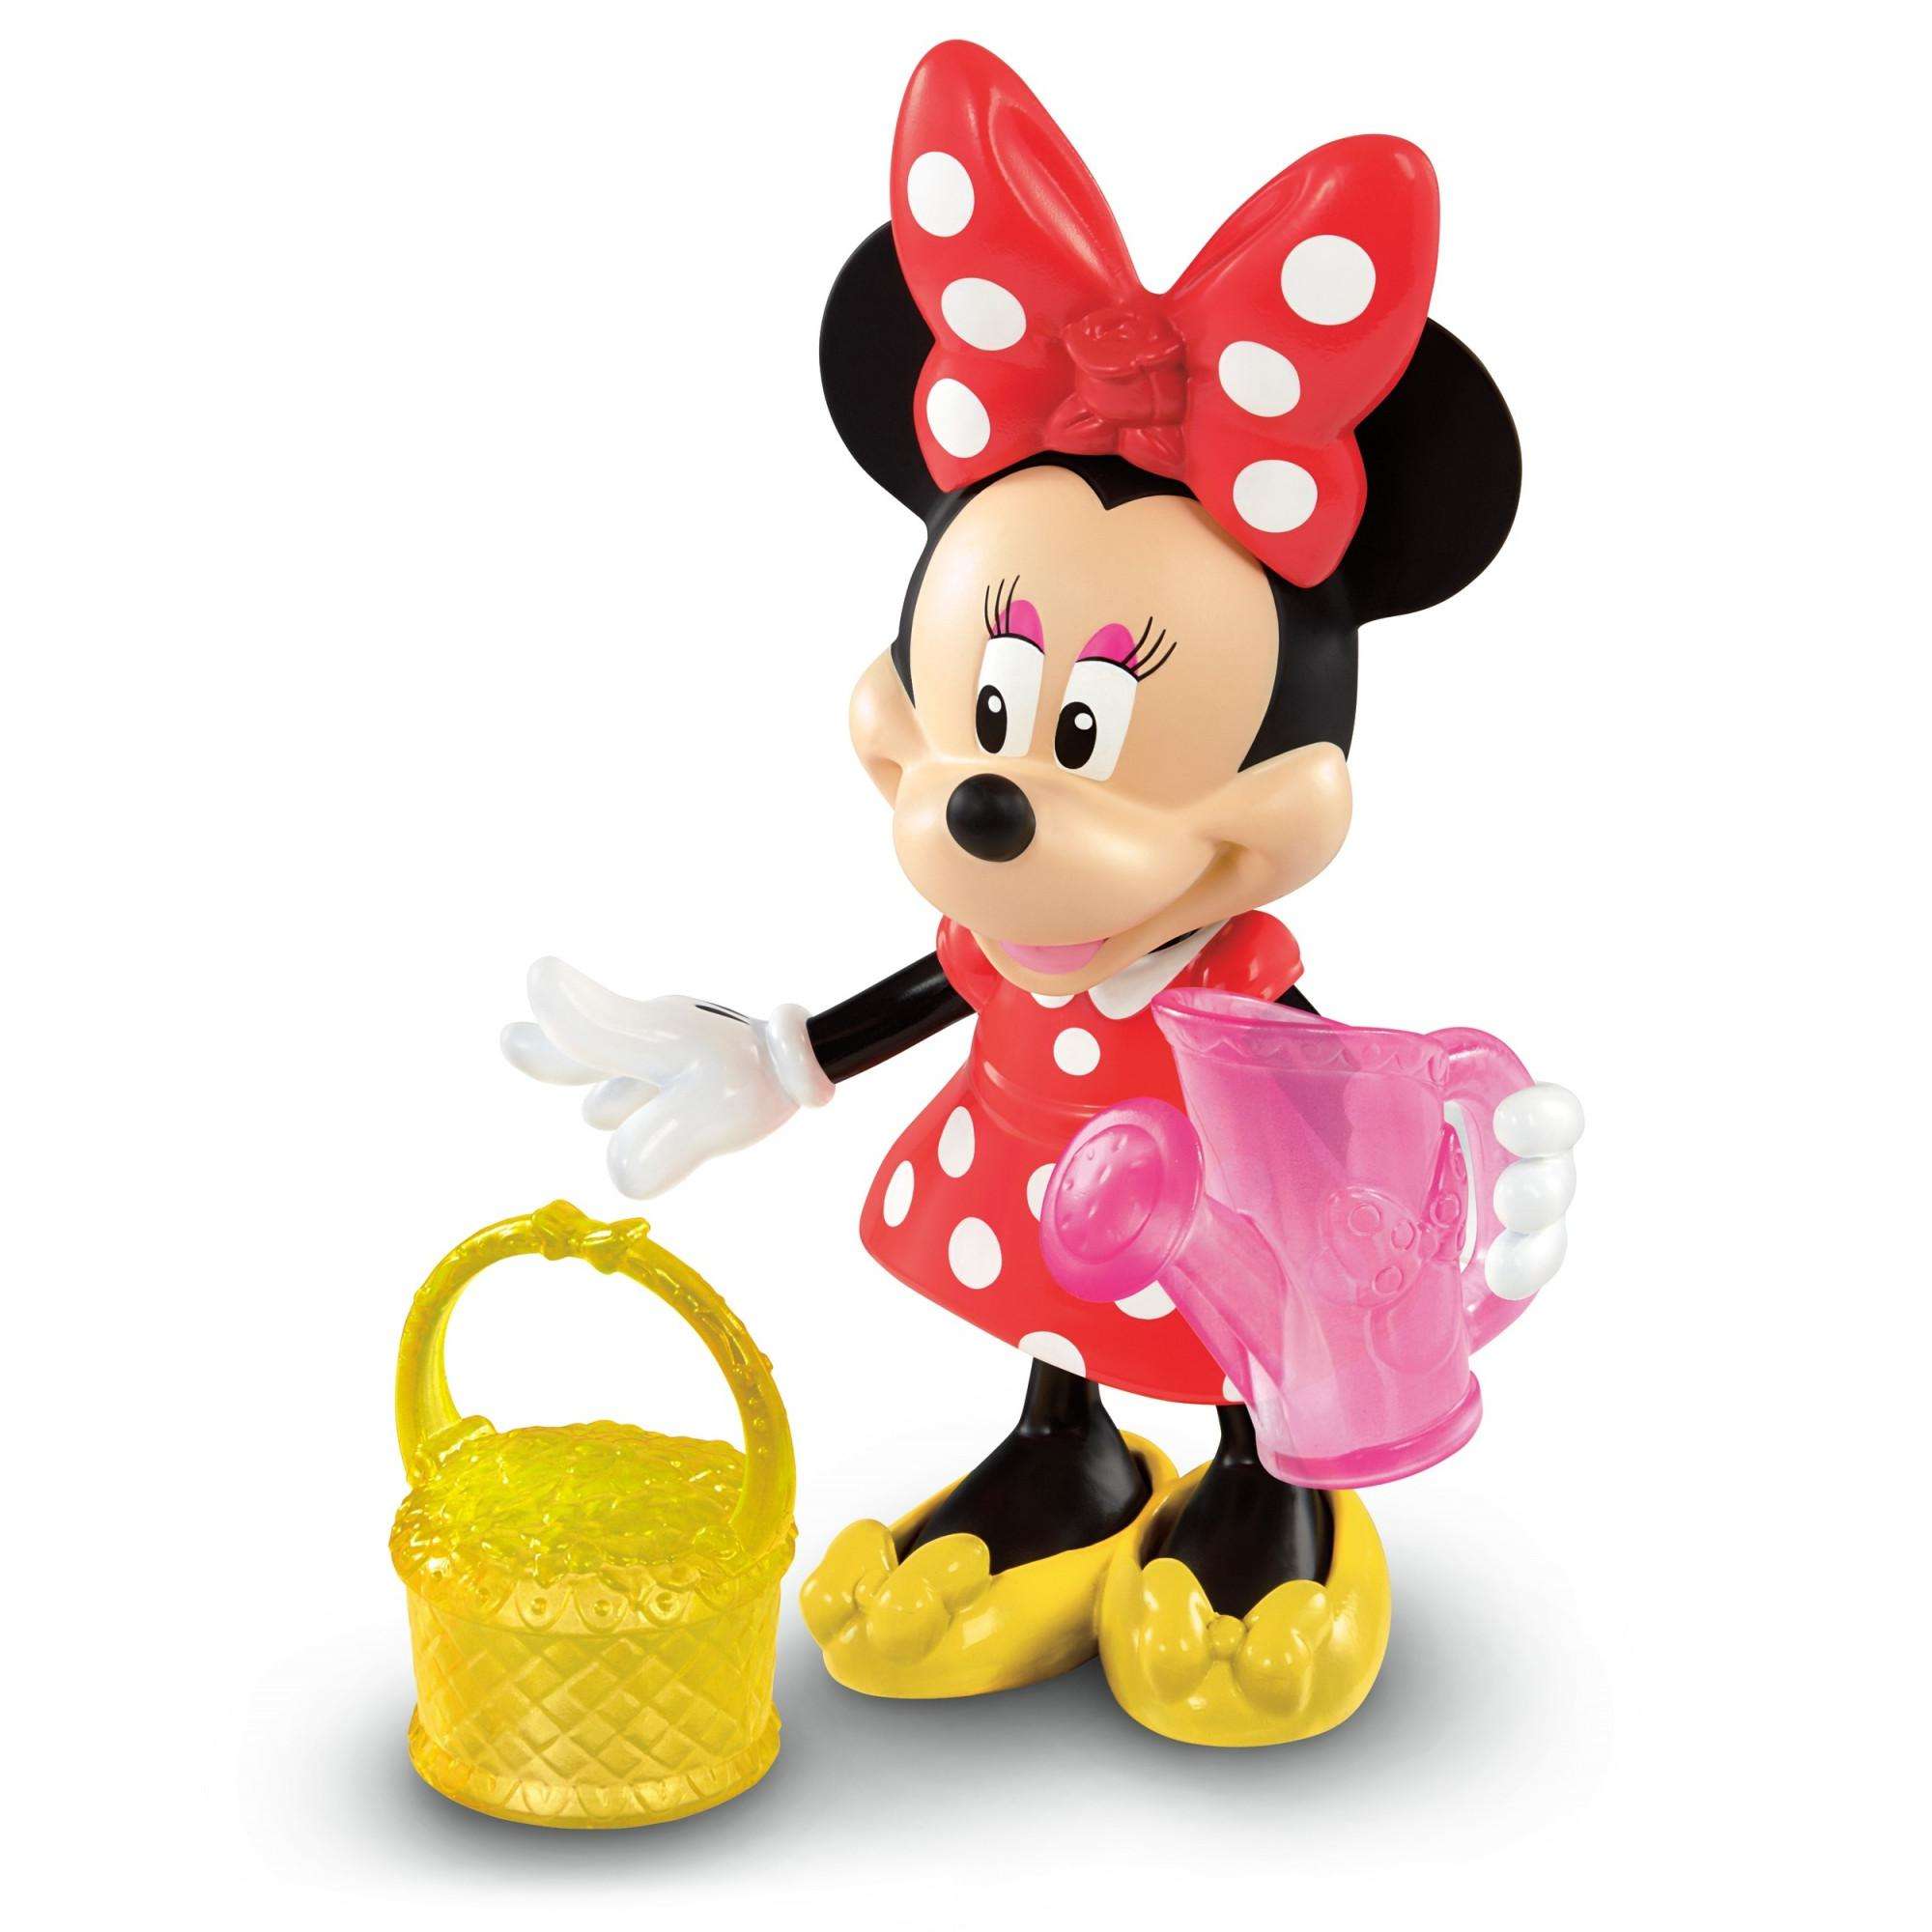 Fisher-Price Disney Minnie Mouse Flower Garden Bow-Tique Playset - image 1 of 4